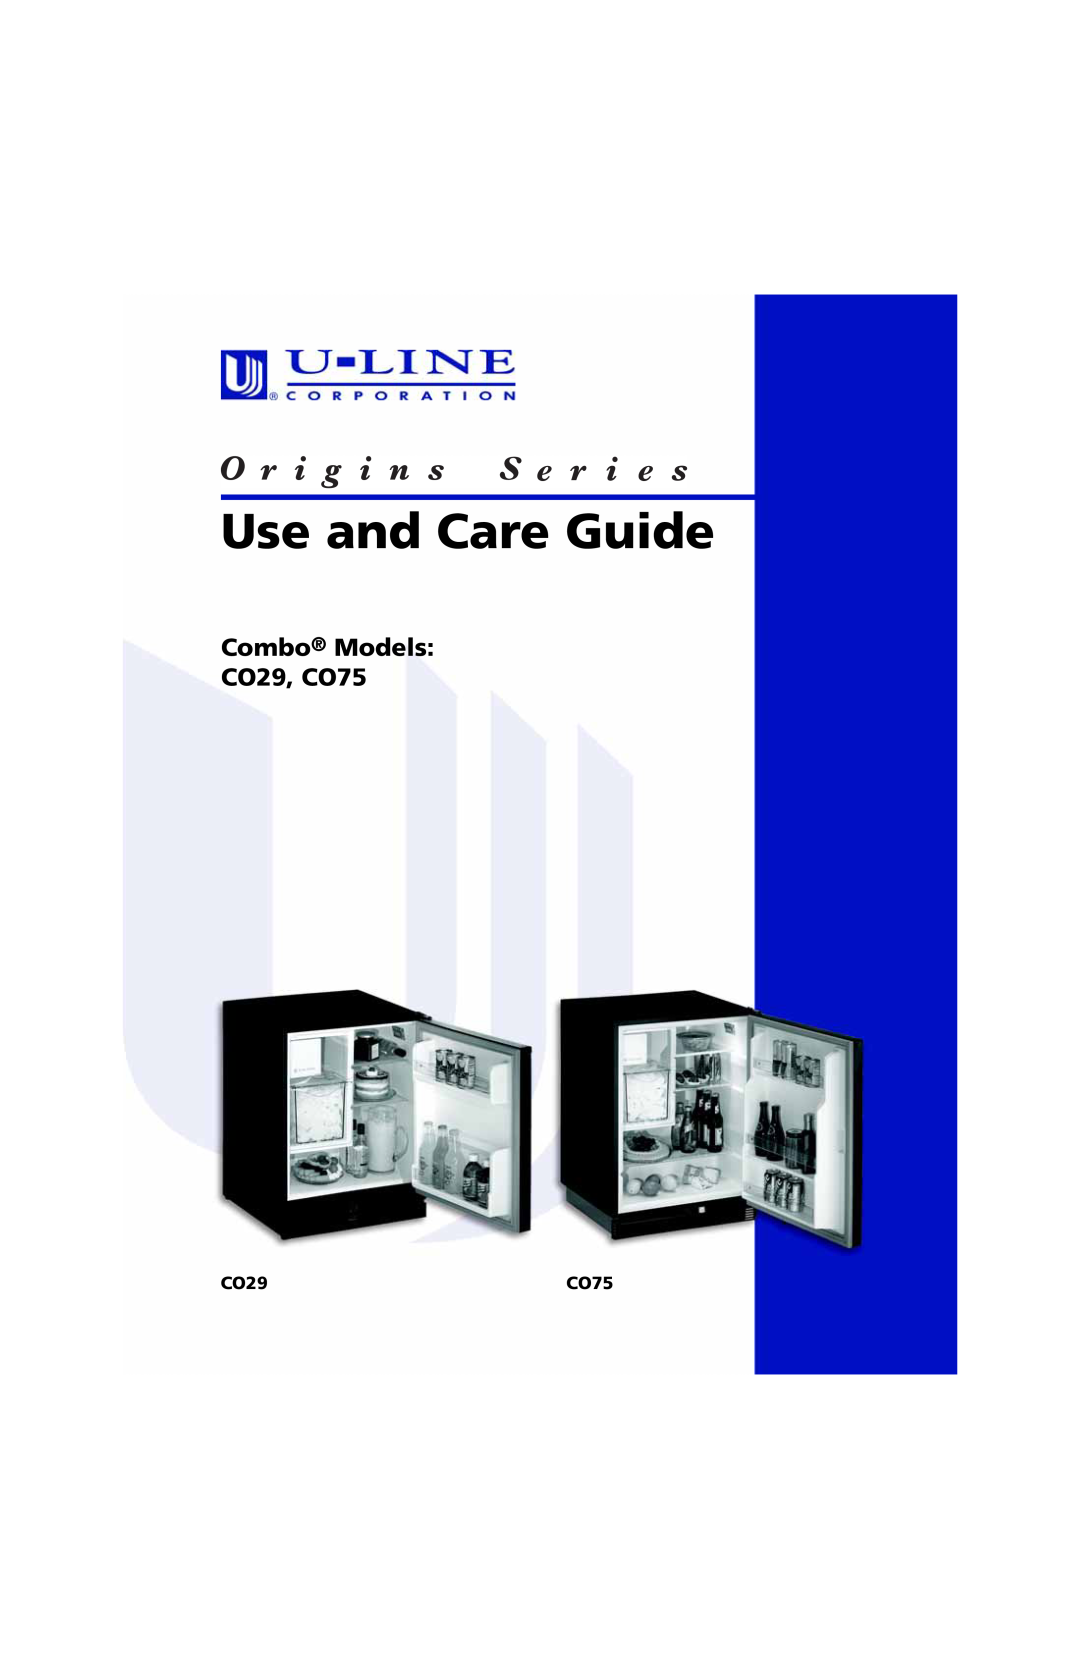 U-Line manual Use and Care Guide, Combo Models CO29, CO75 